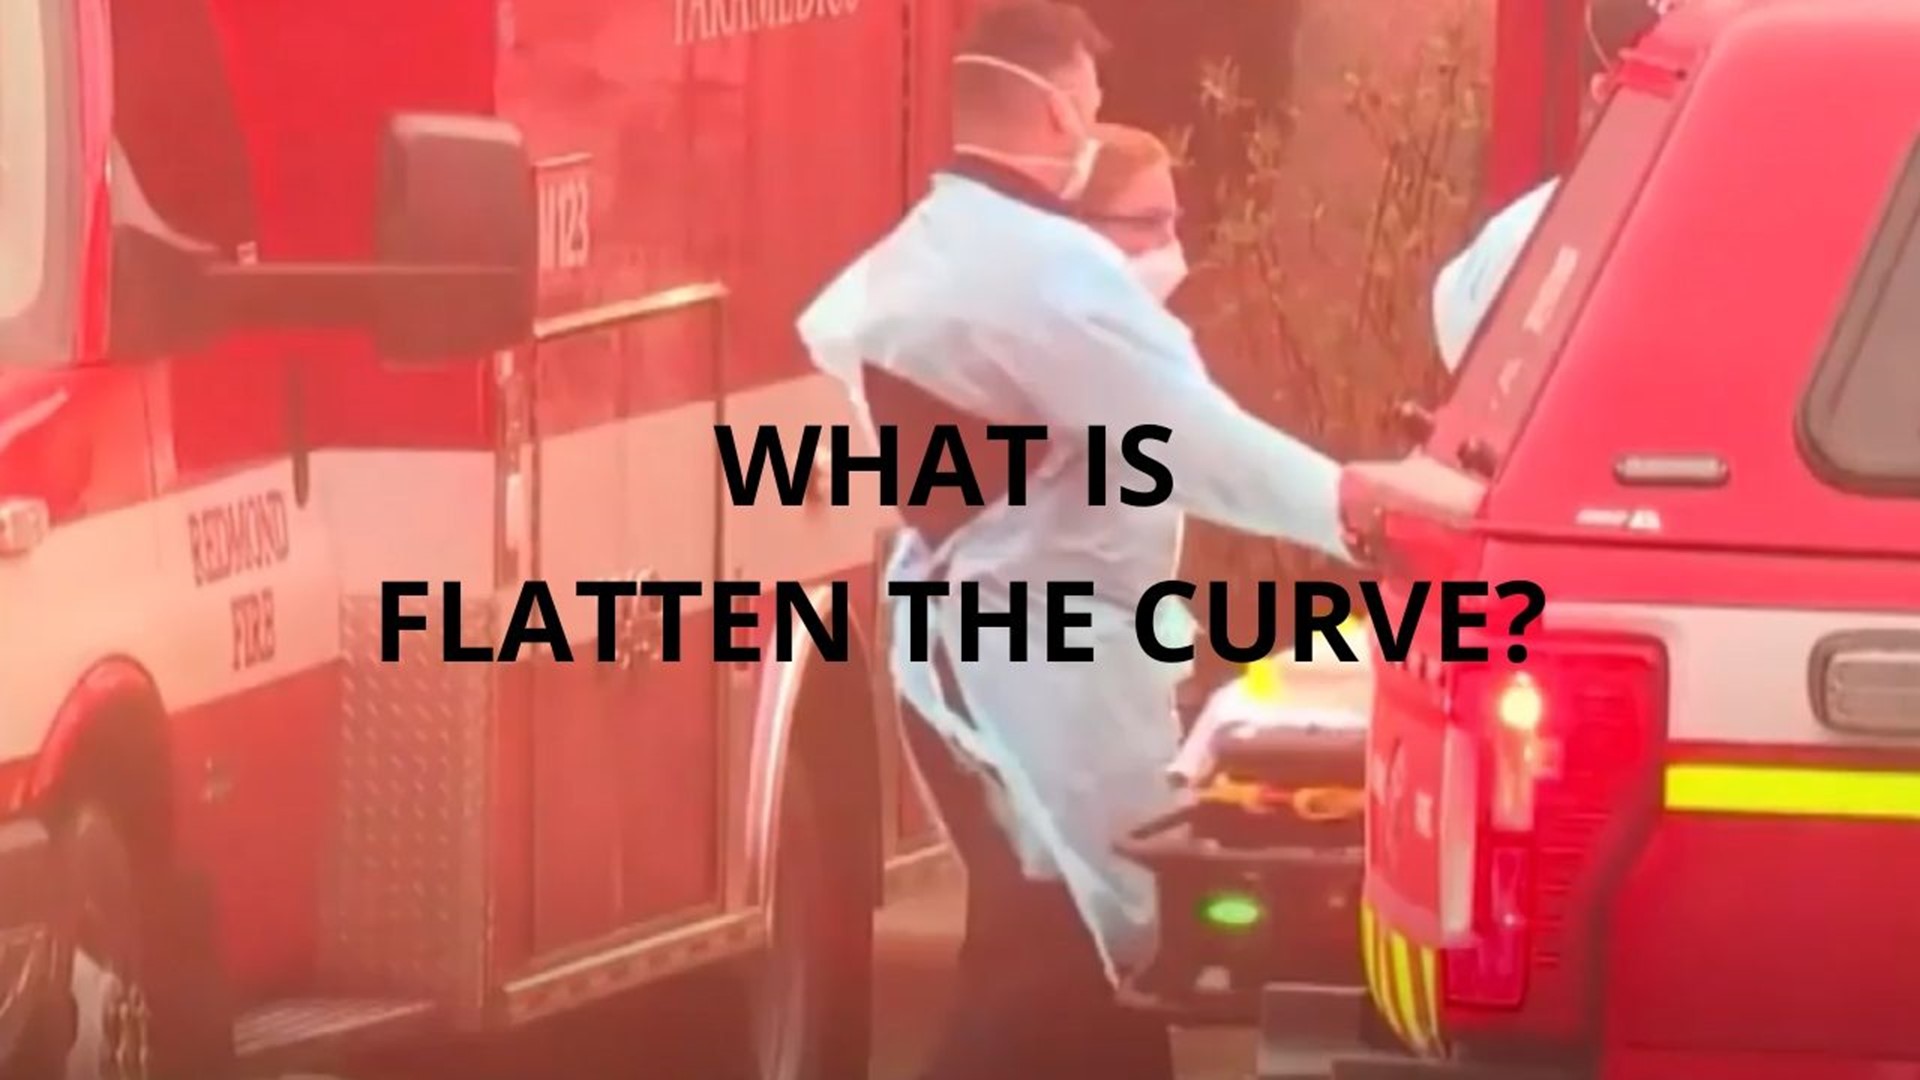 You may have heard a lot about "flatten the Curve" but what does that mean? It is the lifespan of a disease and the hope of lowering the numbers over a longer period